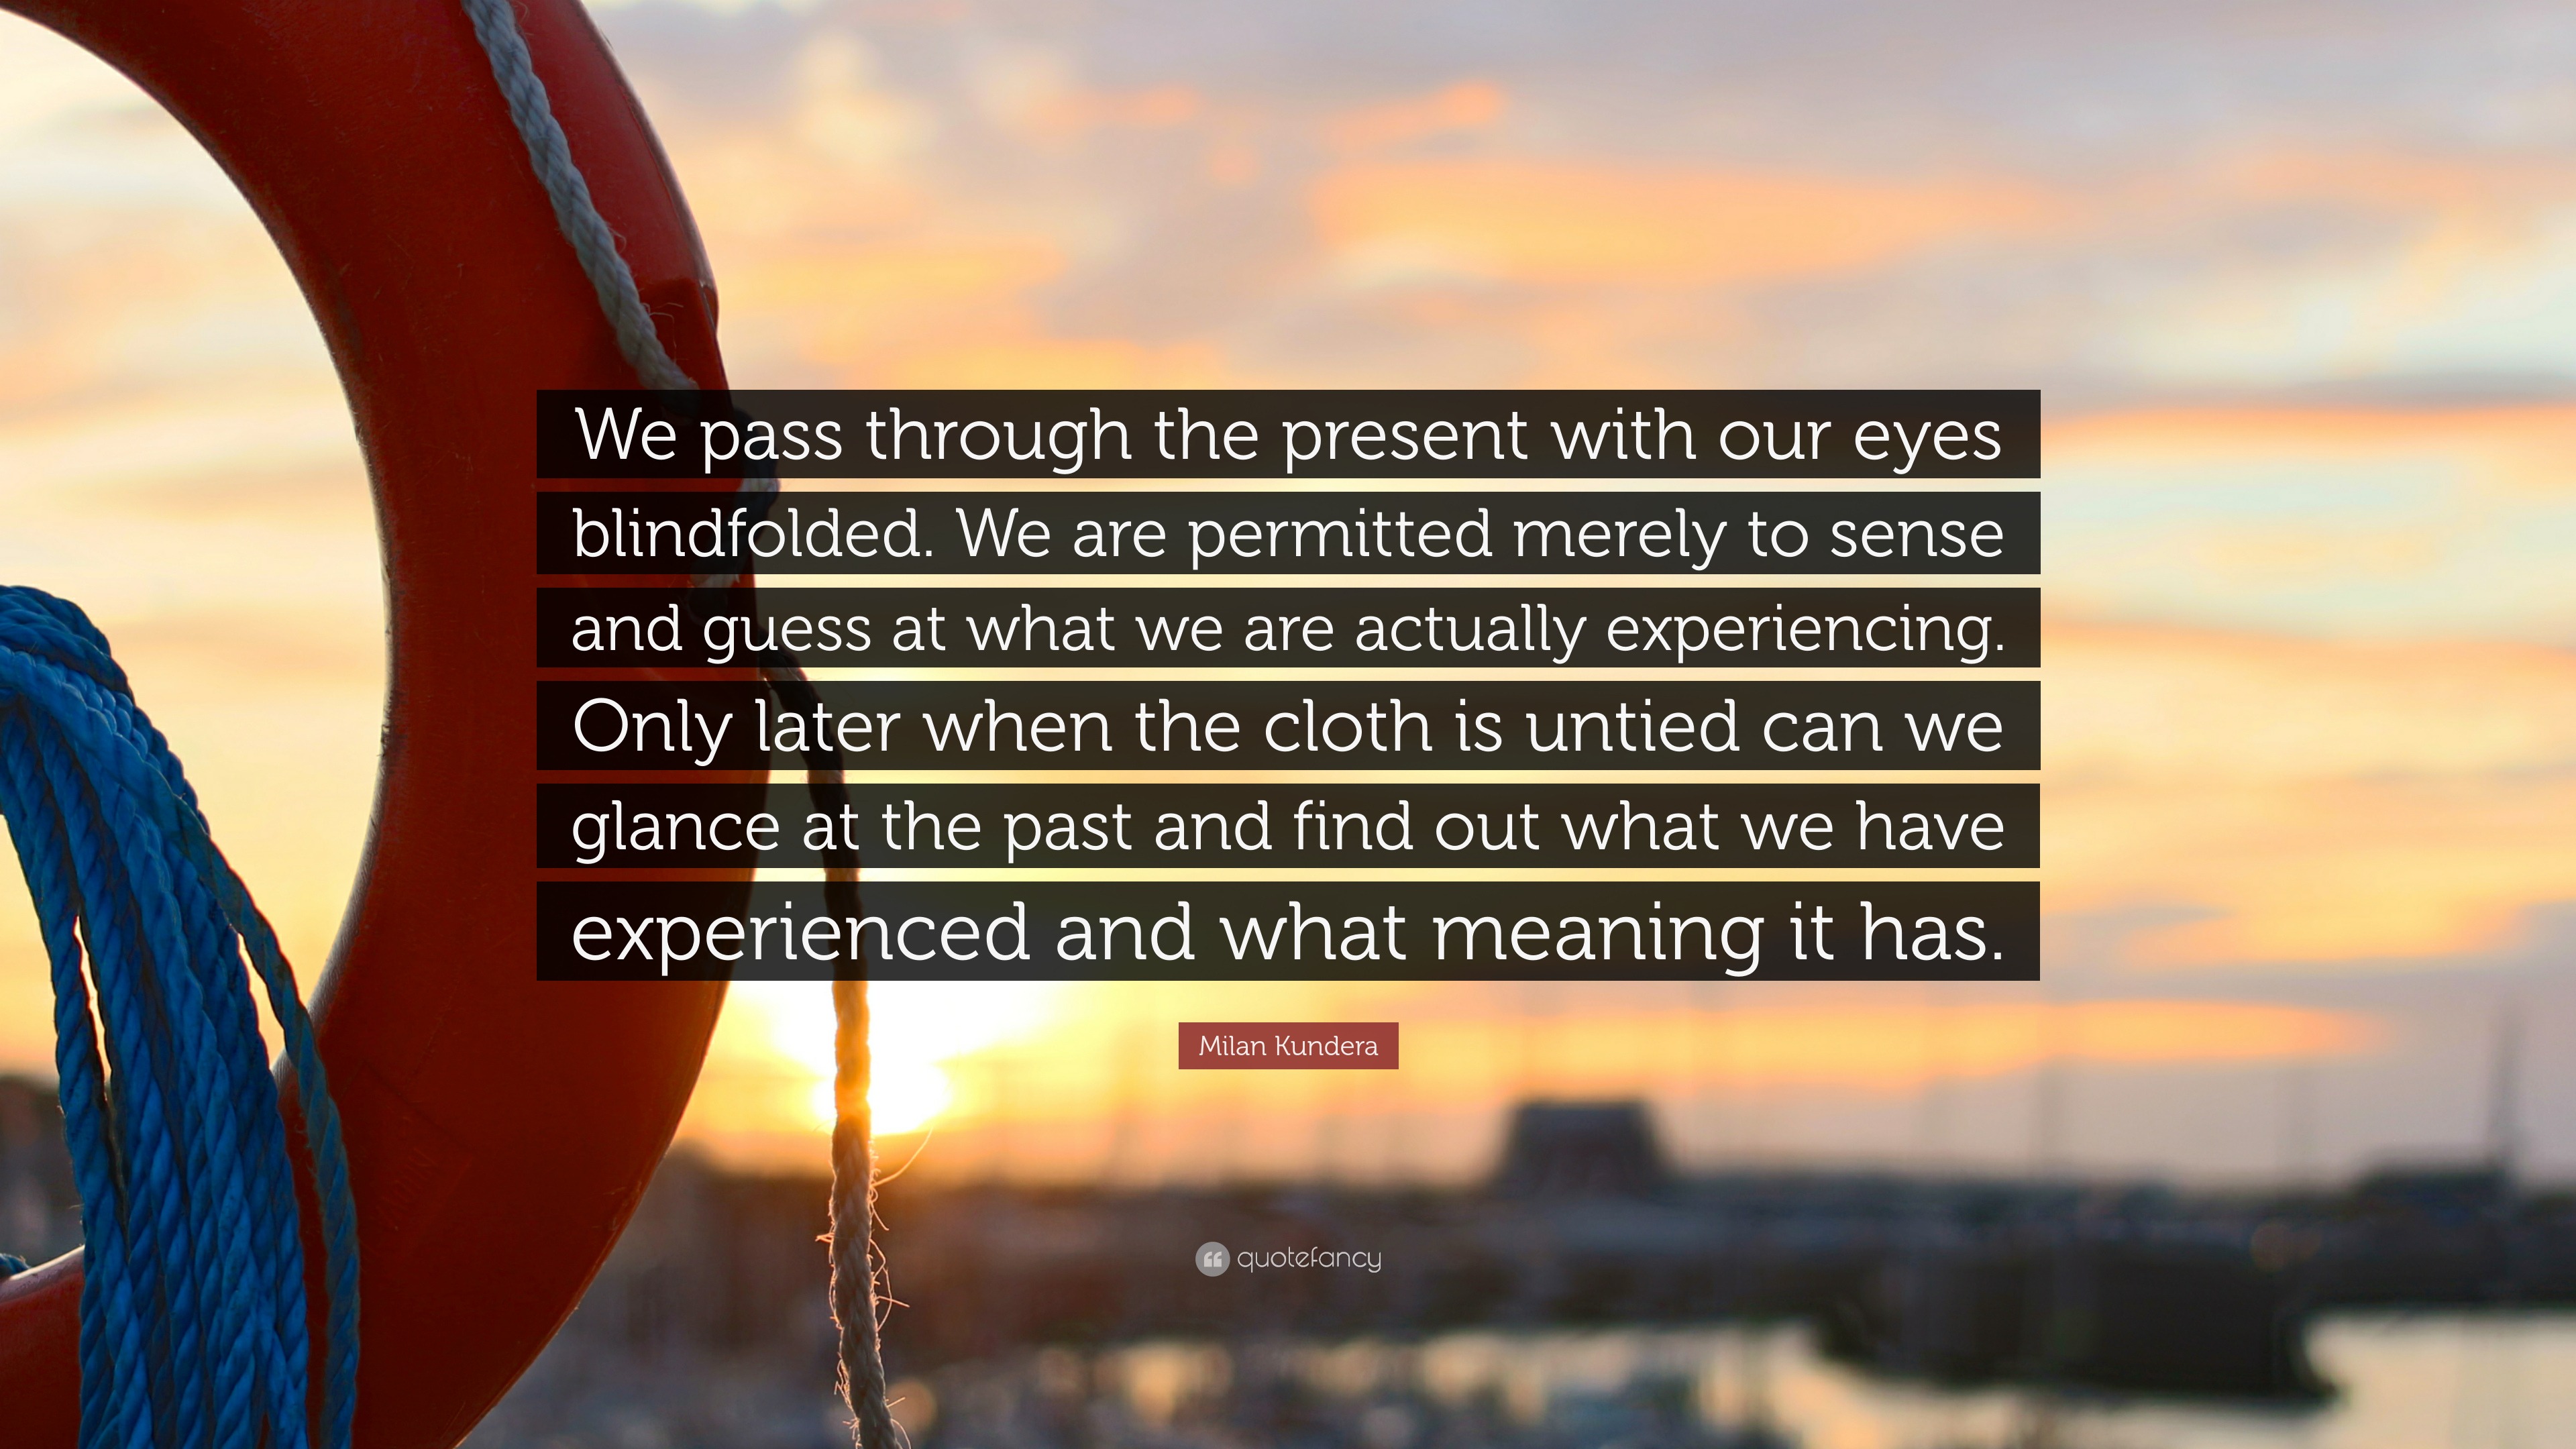 Milan Kundera quote: We pass through the present with our eyes blindfolded.  We